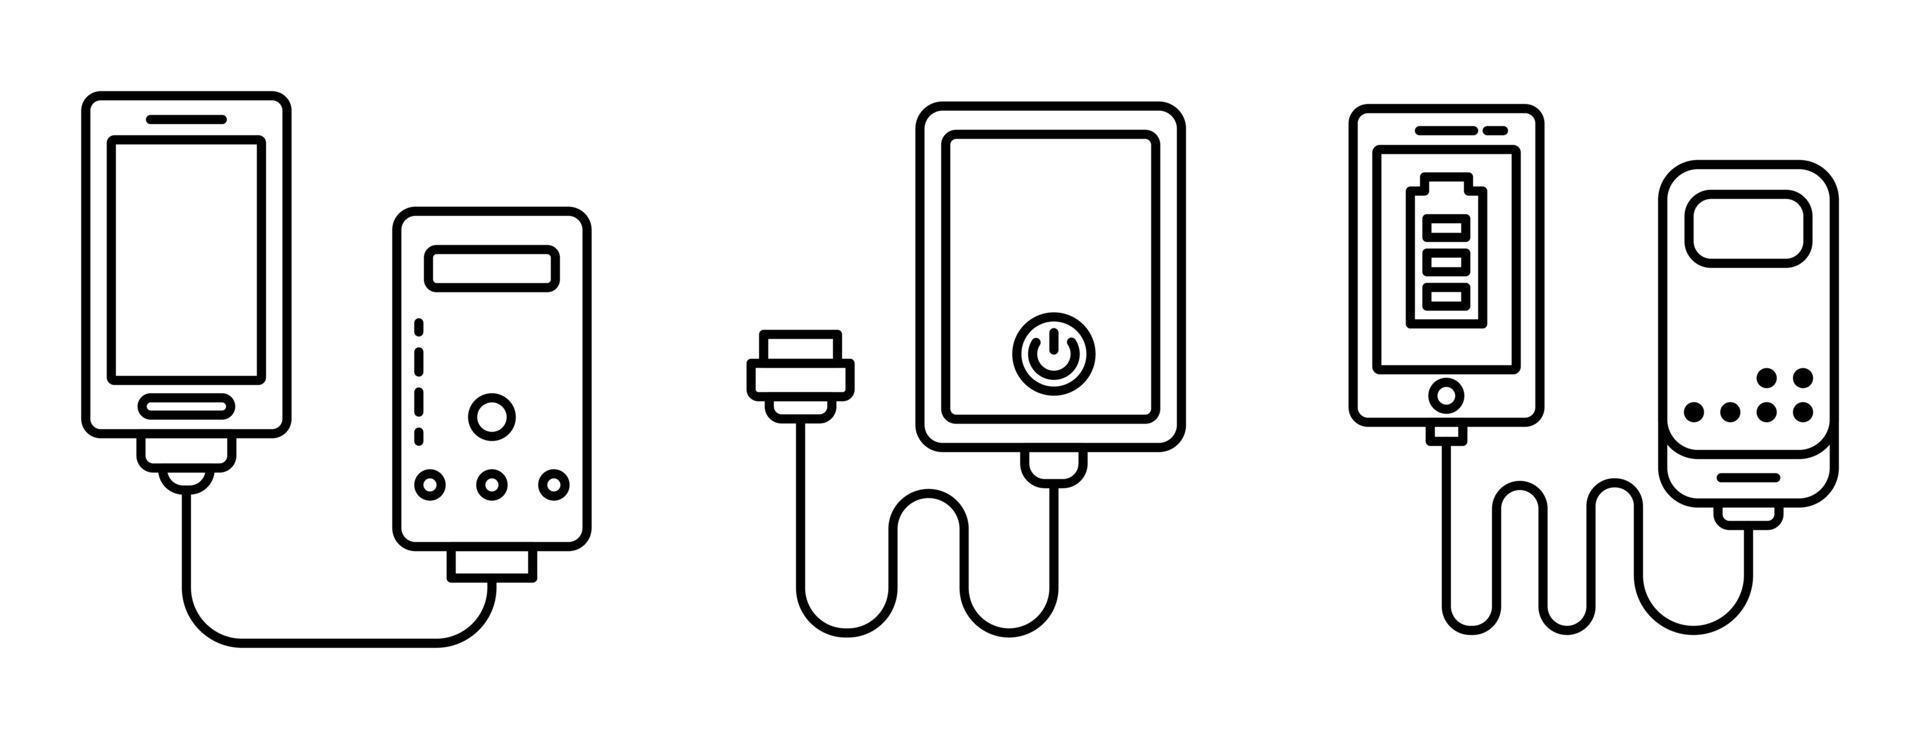 Power bank icons set, outline style vector